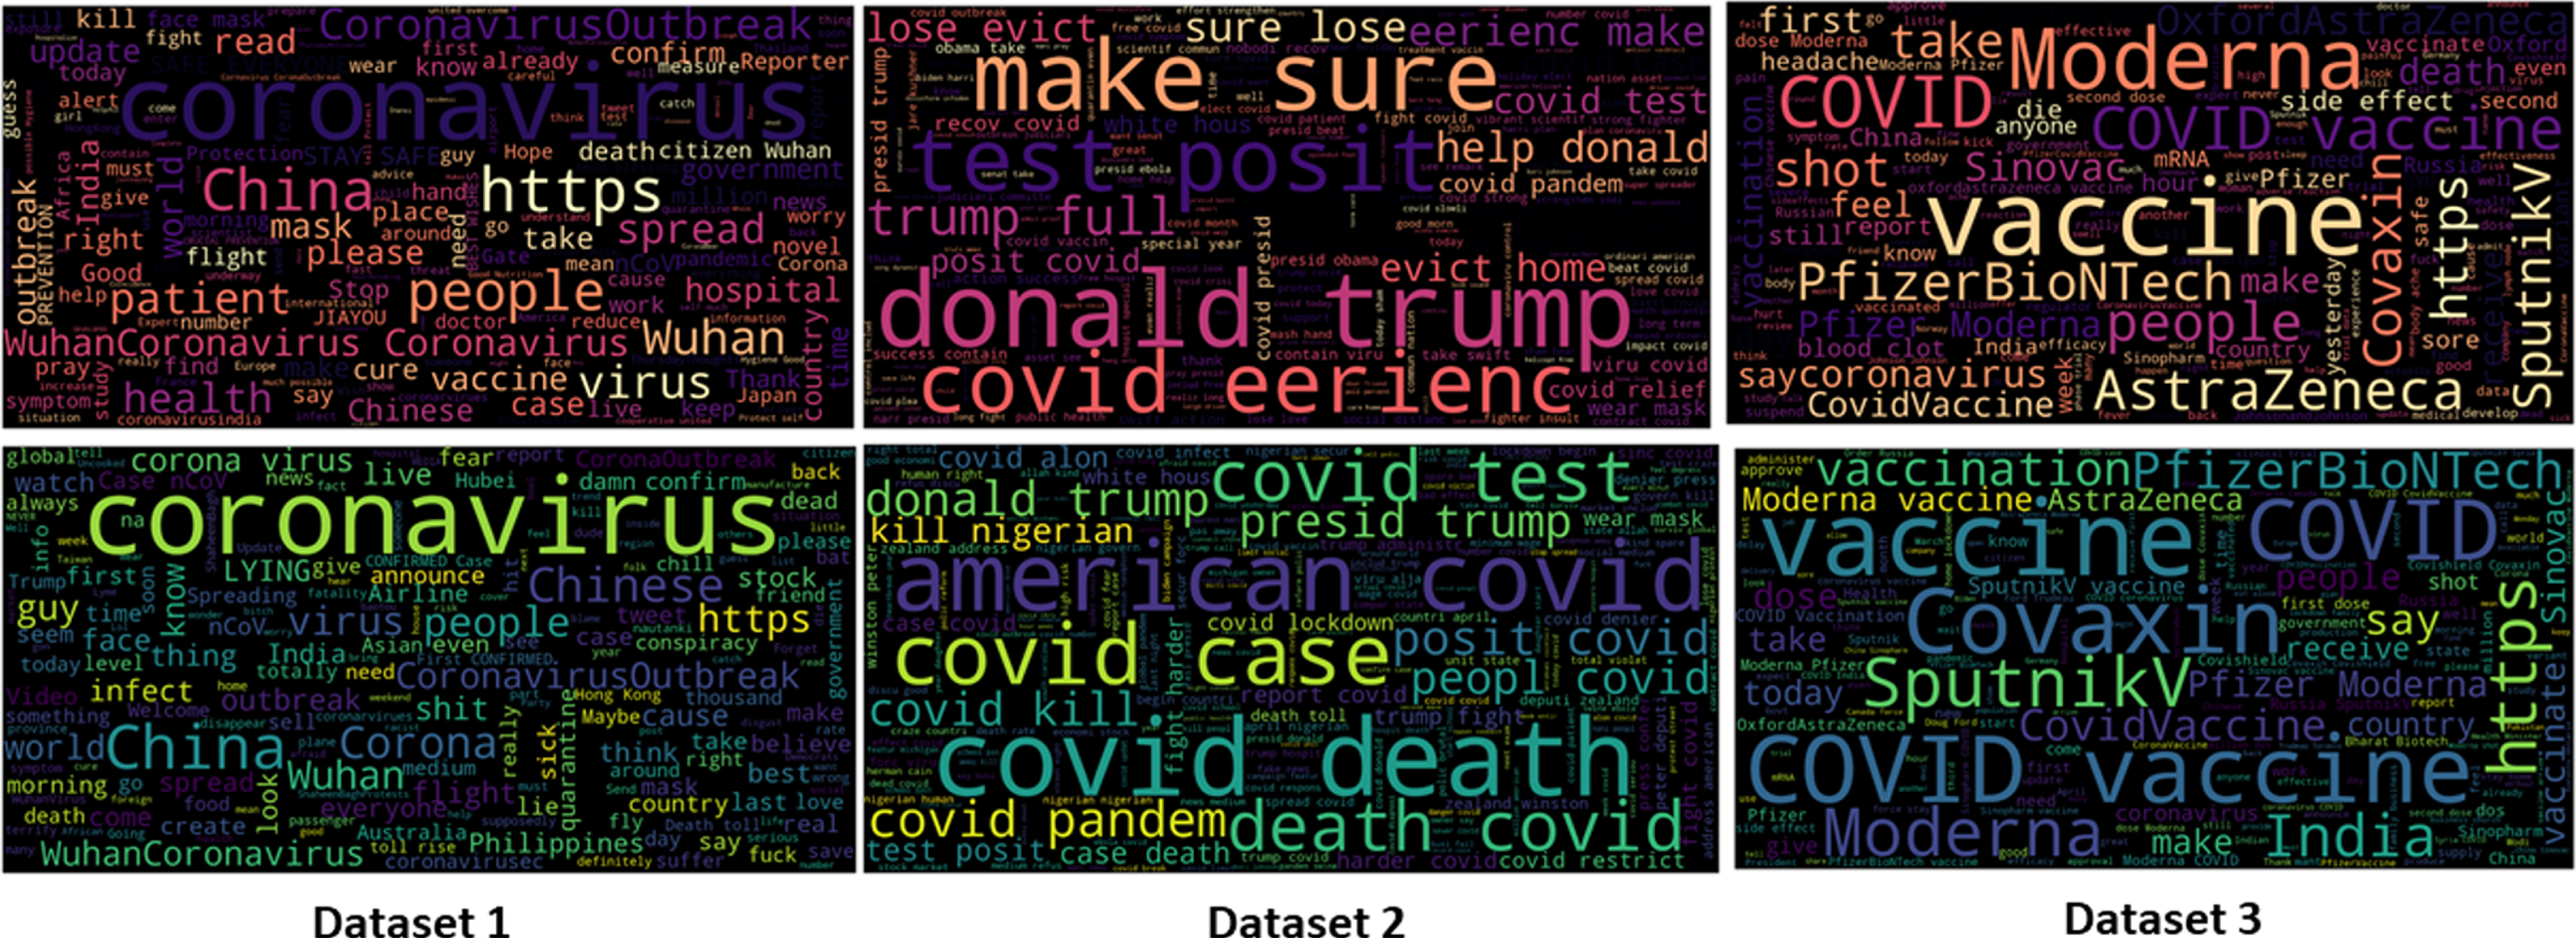 Wordcloud of the COVID-19 twitter datasets. Top and bottom row show positive and negative tweets respectively.